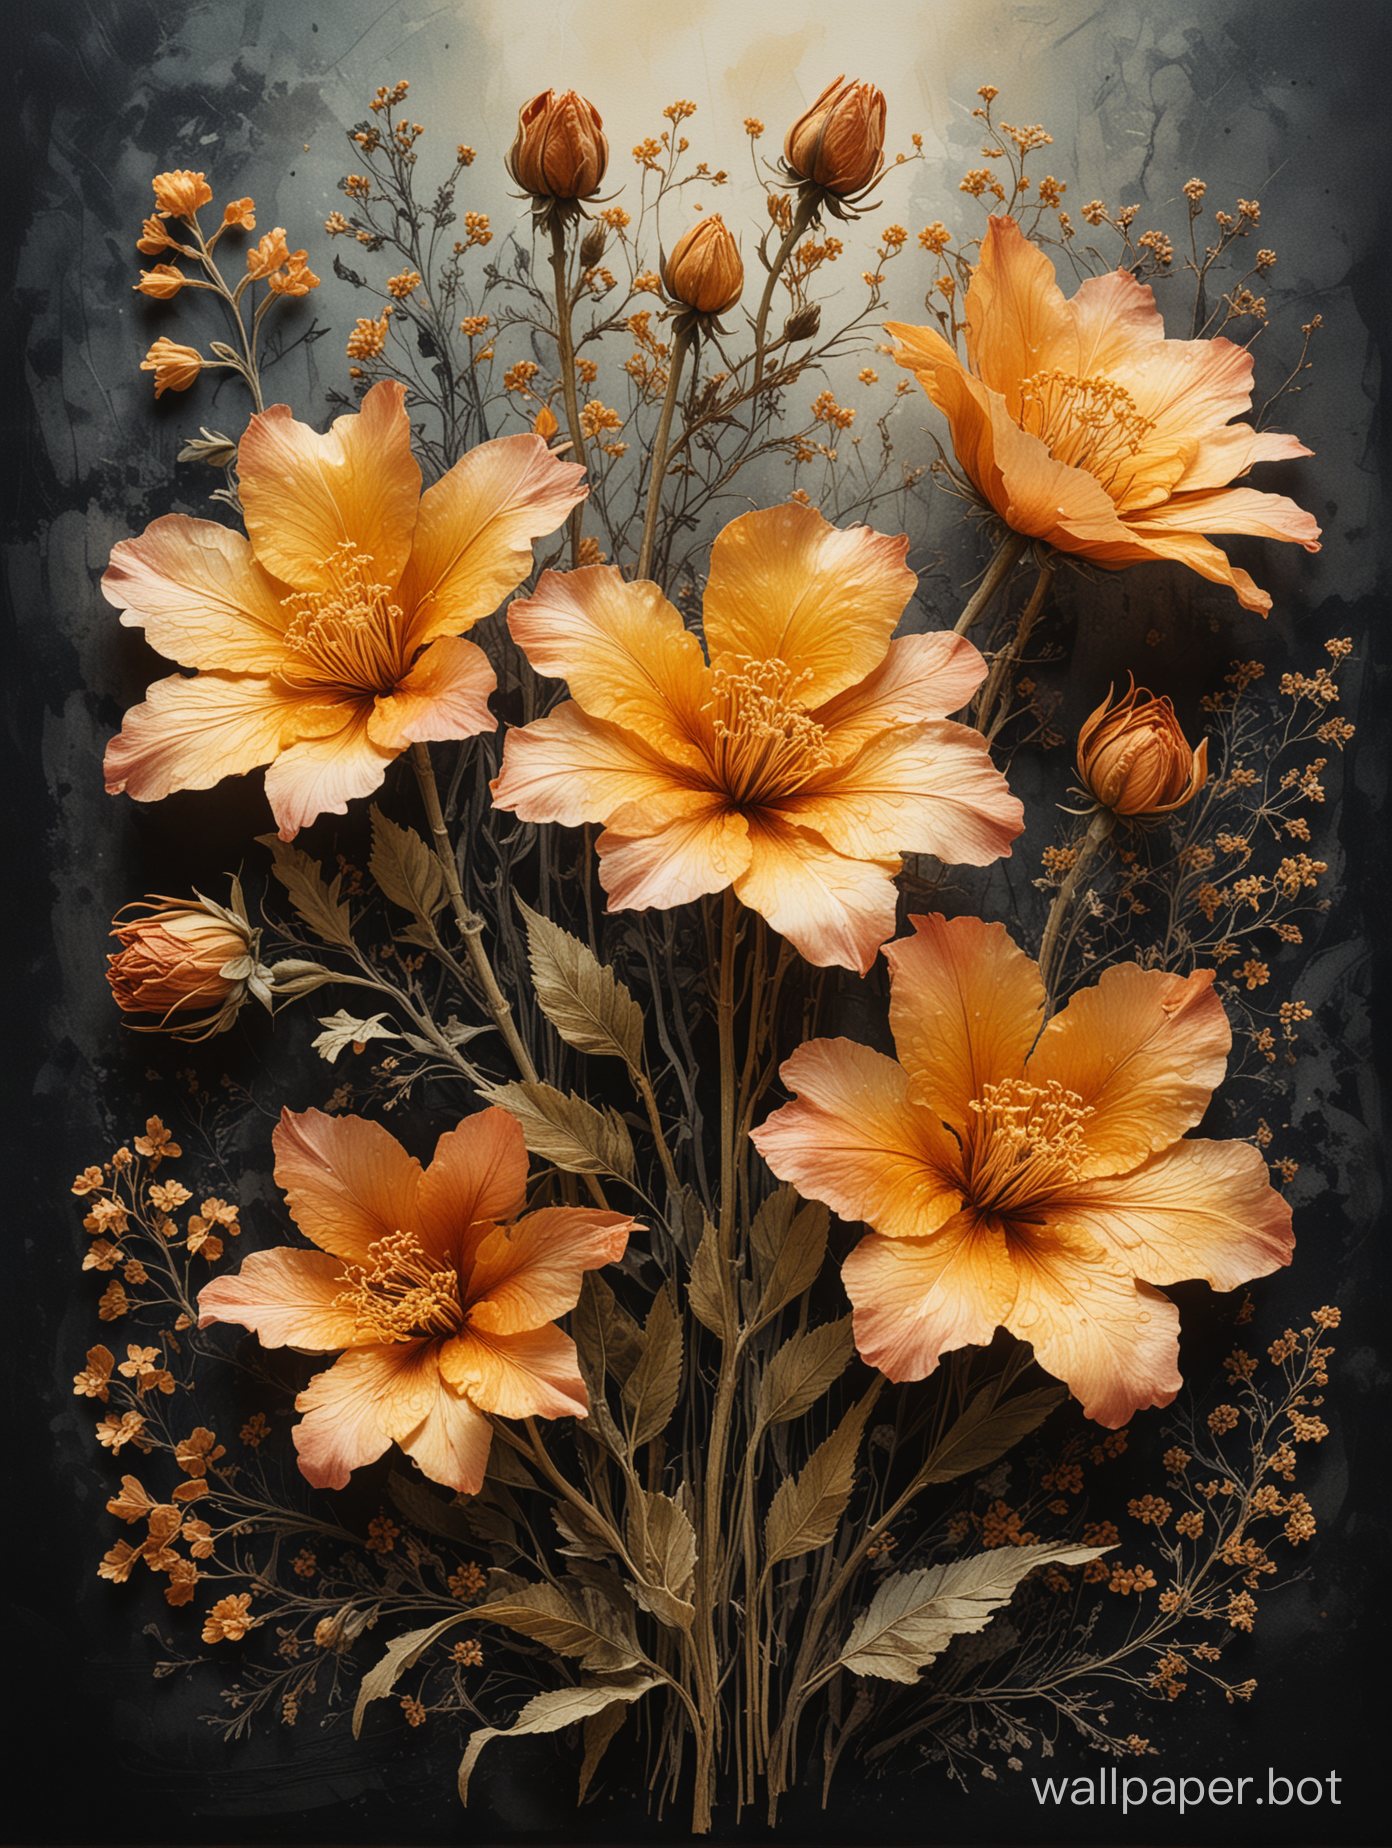 Watercolor depiction of pressed flowers, magnified with visible, intricate veins, arranged gently upon vintage-toned, textured paper, soft shadows caressing each bloom, backlighting imitates a setting sun's warmth, golden hour for atmosphere, combining neon ambiance, abstract elements of black oil with gear mecha, rendered with detailed acrylic and a touch of grunge for intricate complexity, all elements synthesized in ultra-fine